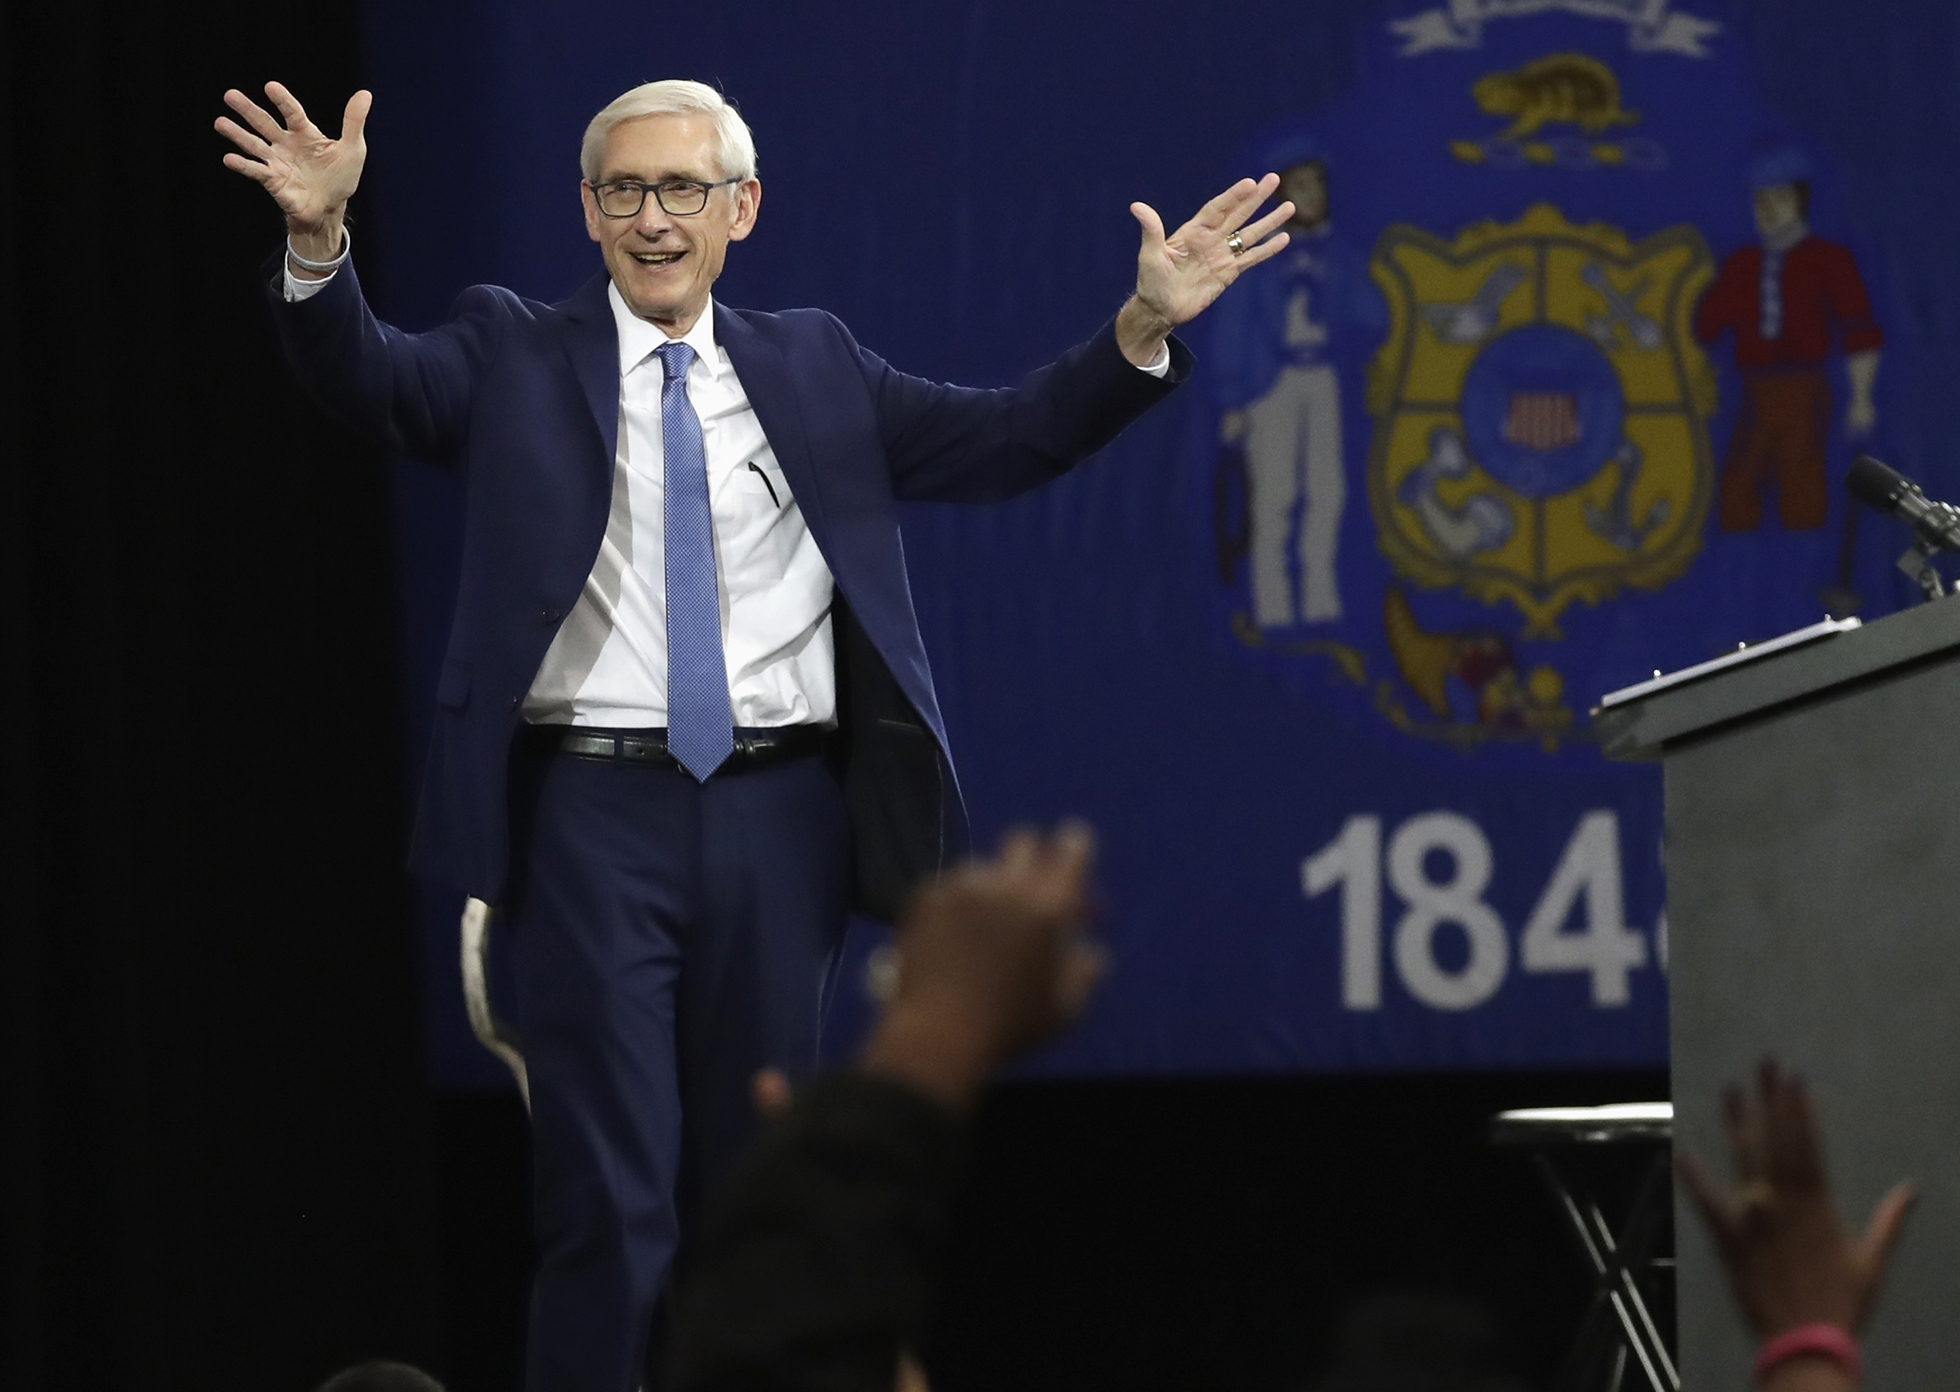 Wisconsin Democratic candidate for governor Tony Evers speaks at a rally in Milwaukee